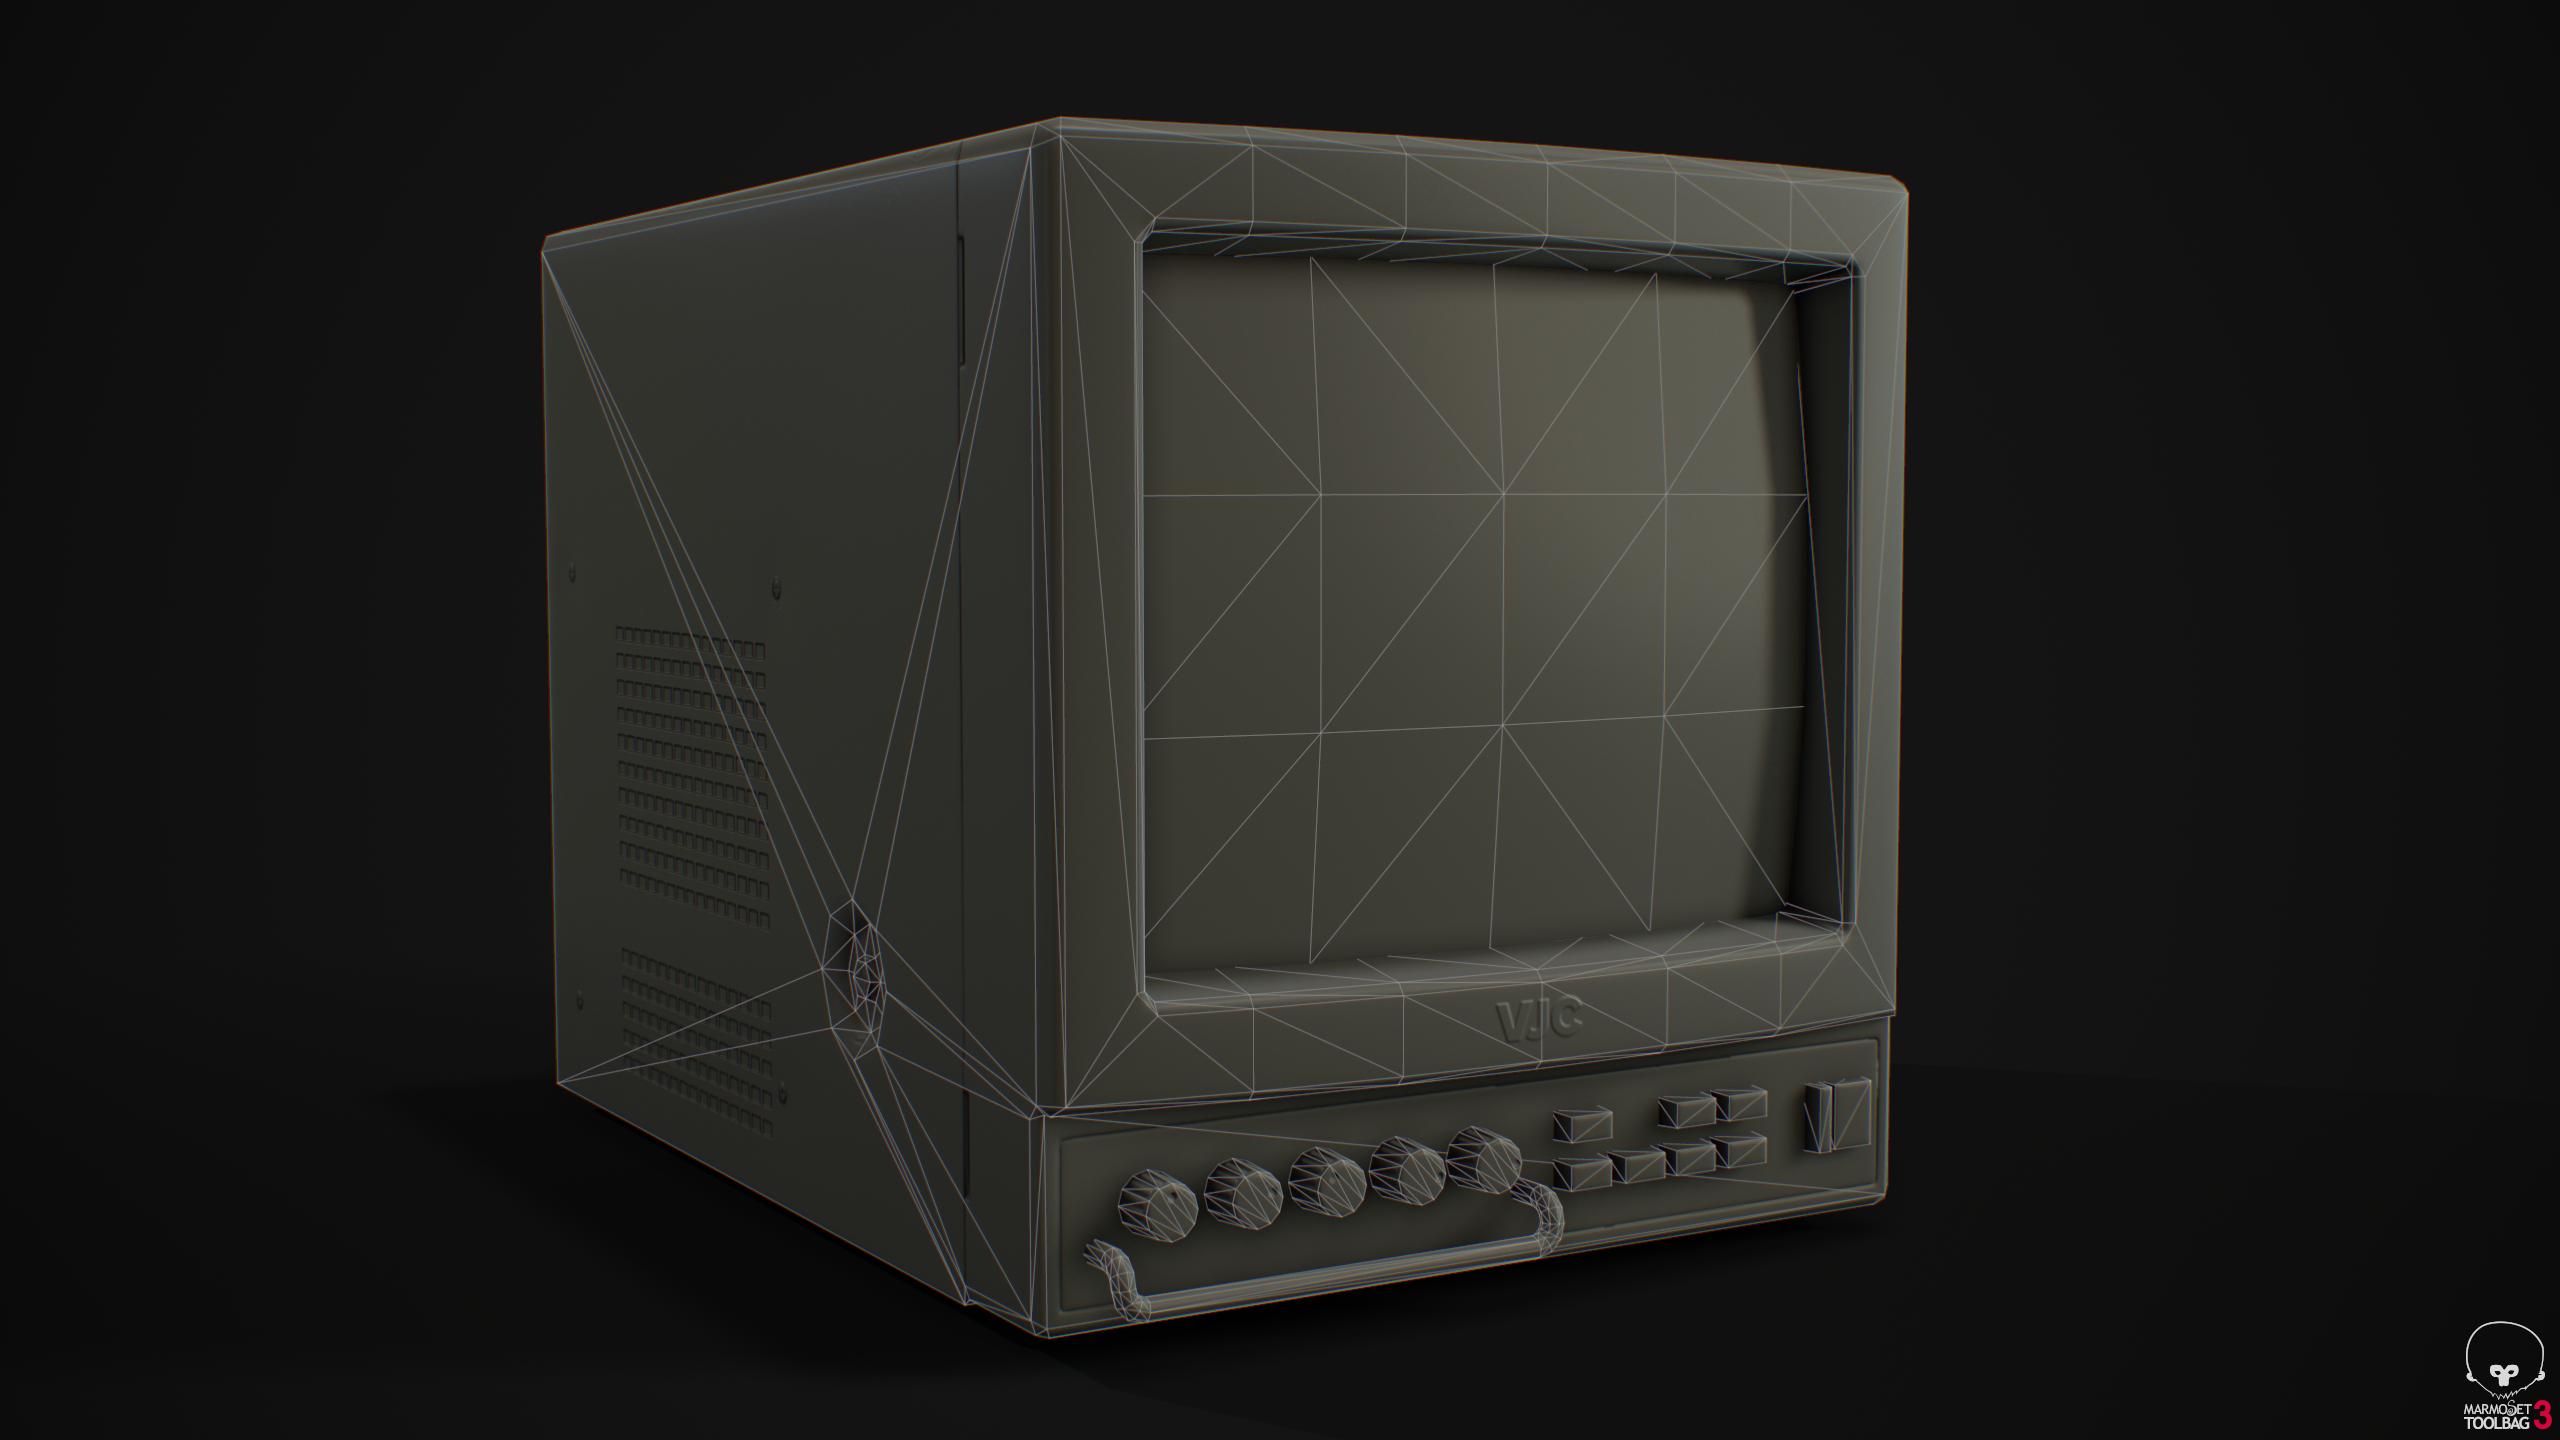 Wireframe render of a cctv monitor